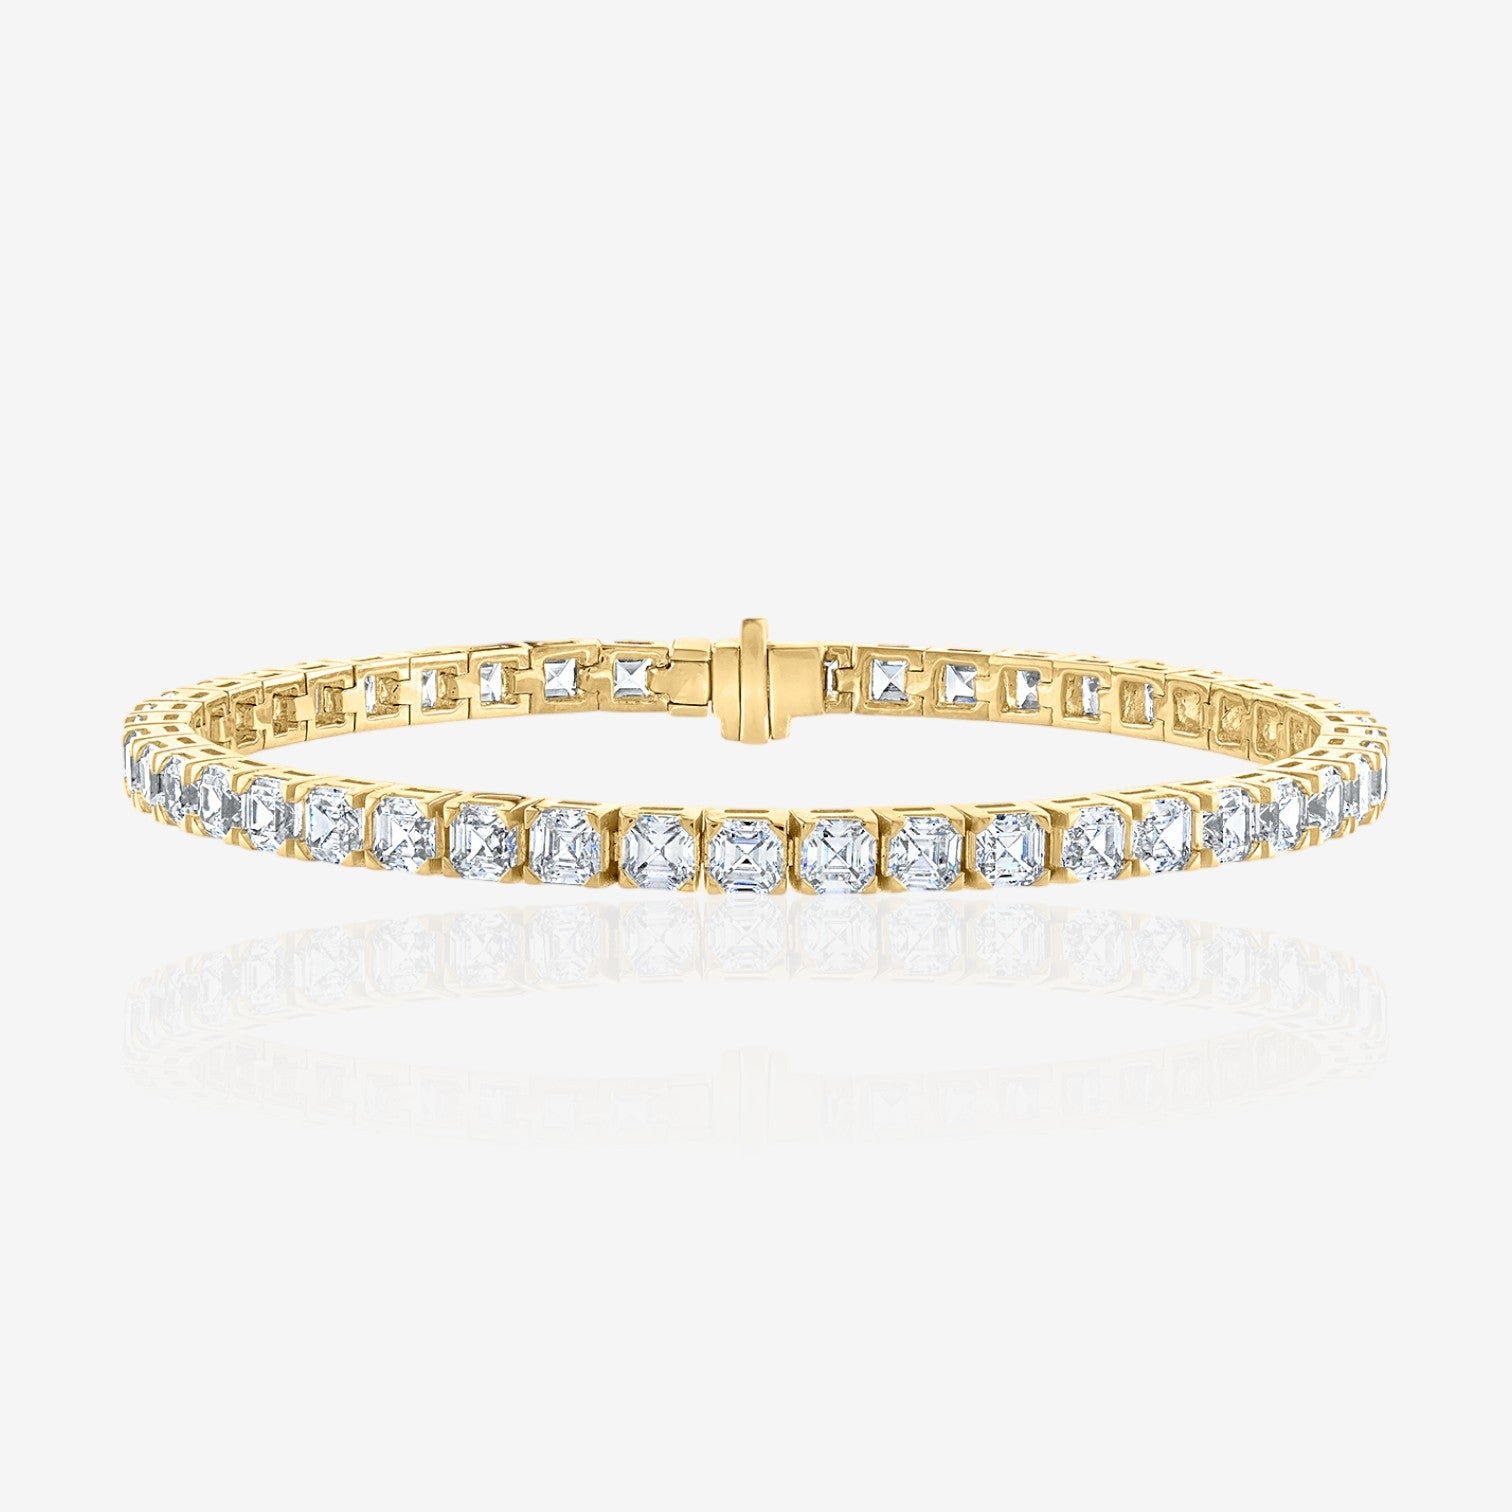 14kt yellow gold/4.68/6.75/top